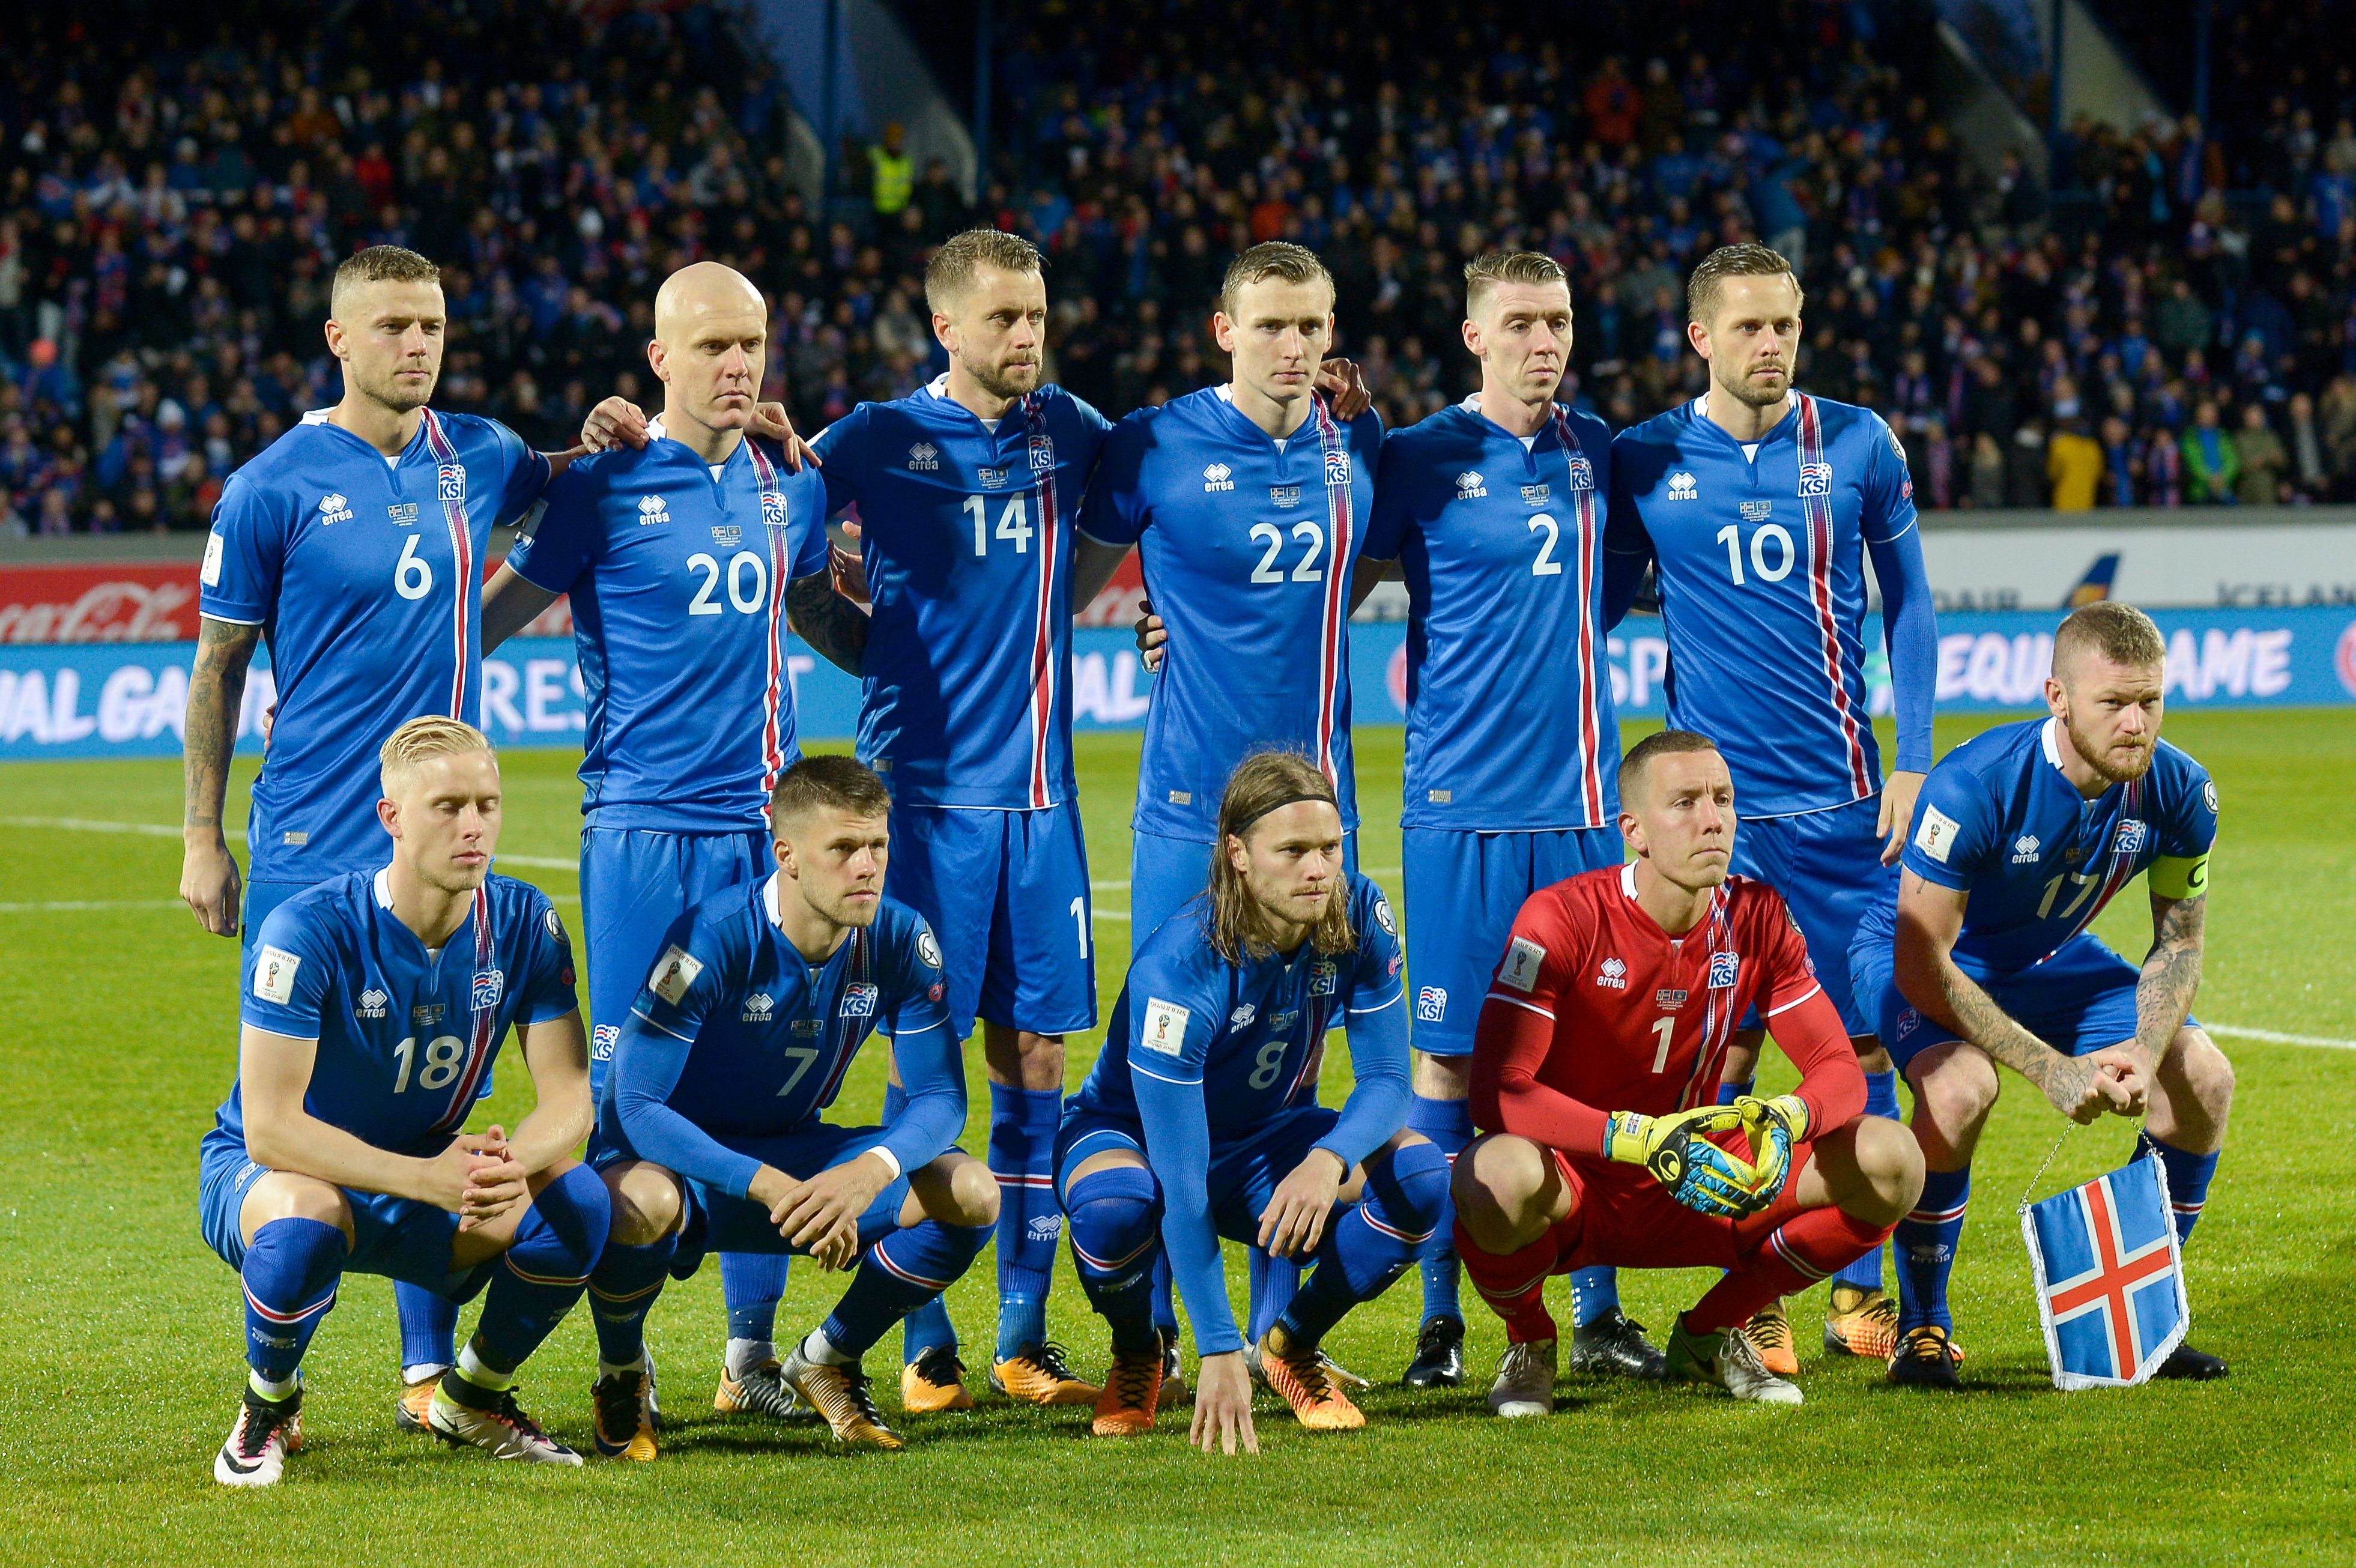 Iceland Soccer Team 5 Fast Facts You Need to Know